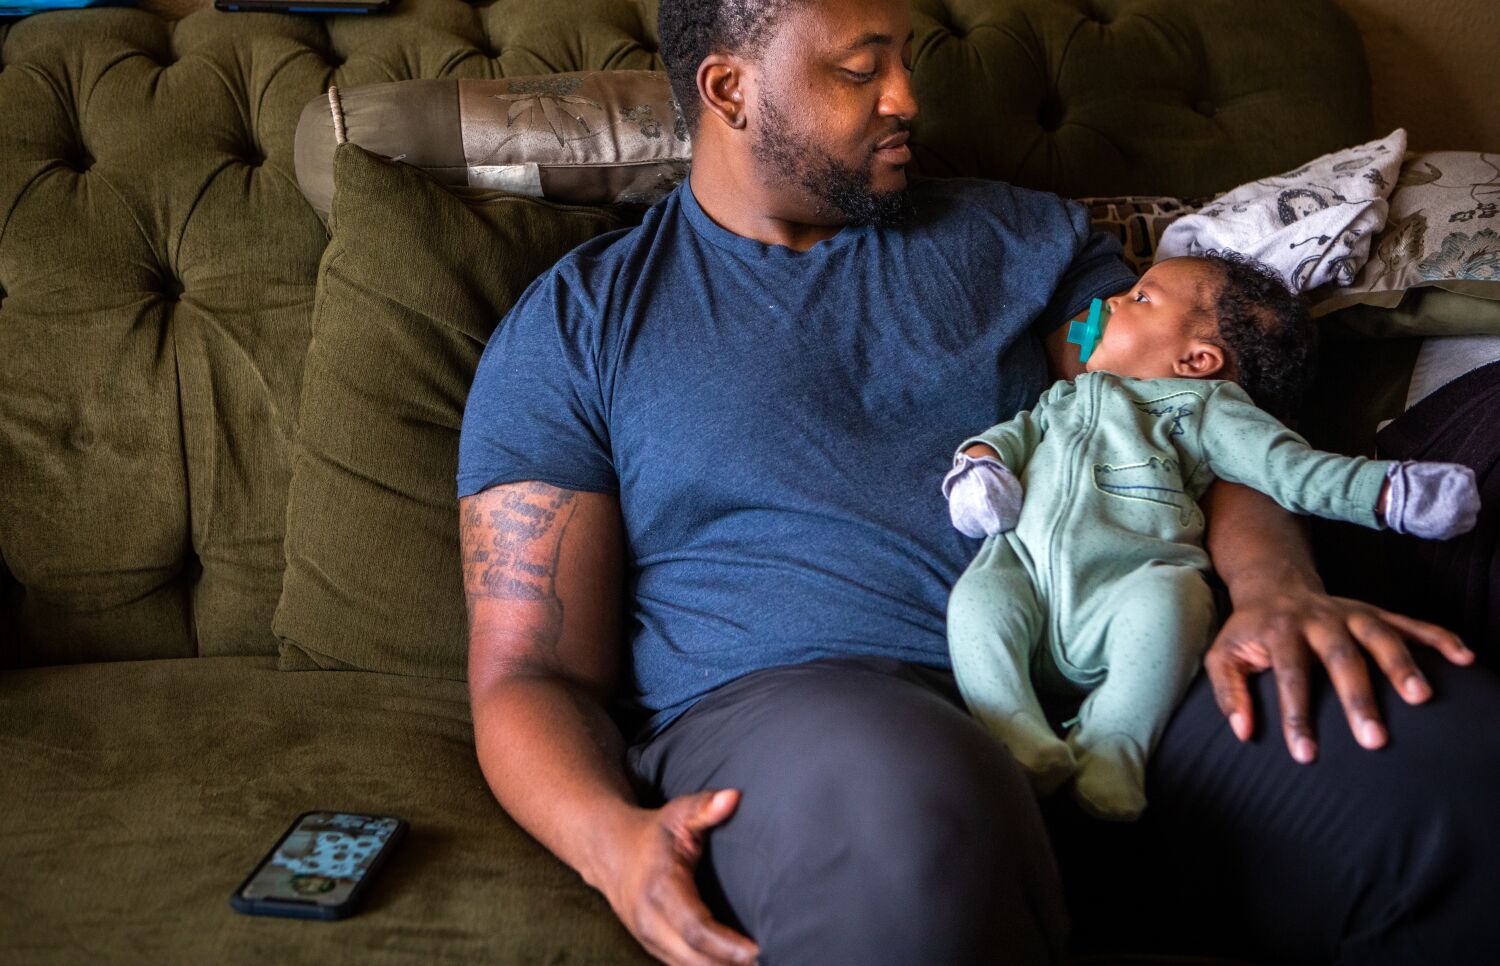 Breasts are made for feeding. New dads play a key role in successful nursing, safe sleep